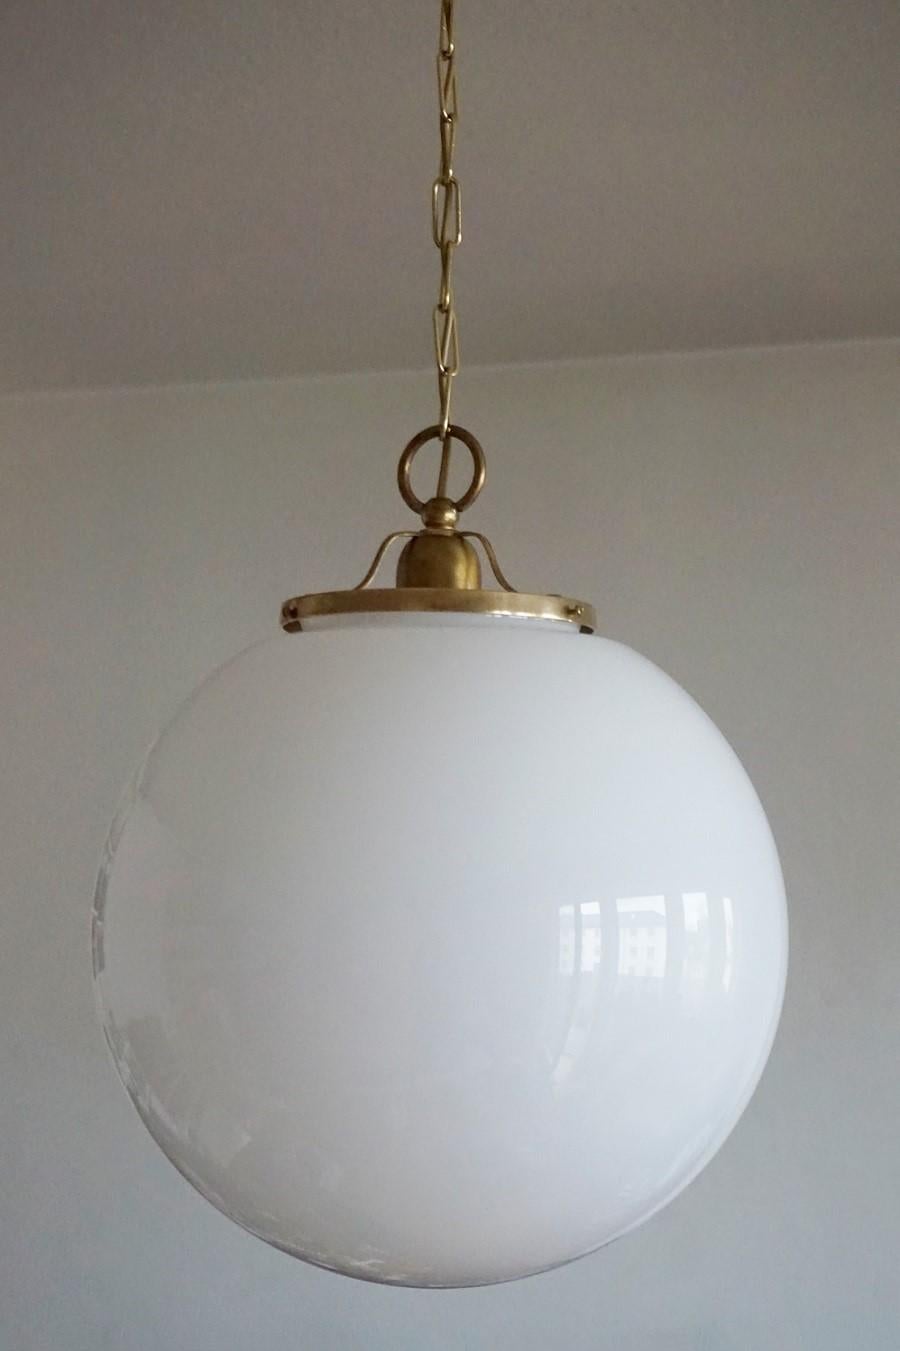 Large hand blown opaline glass ball pendants, brass-mounted with a single E-27 light socket for a large sized bulb, Italy. 1950s.
Measures: Diameter 14